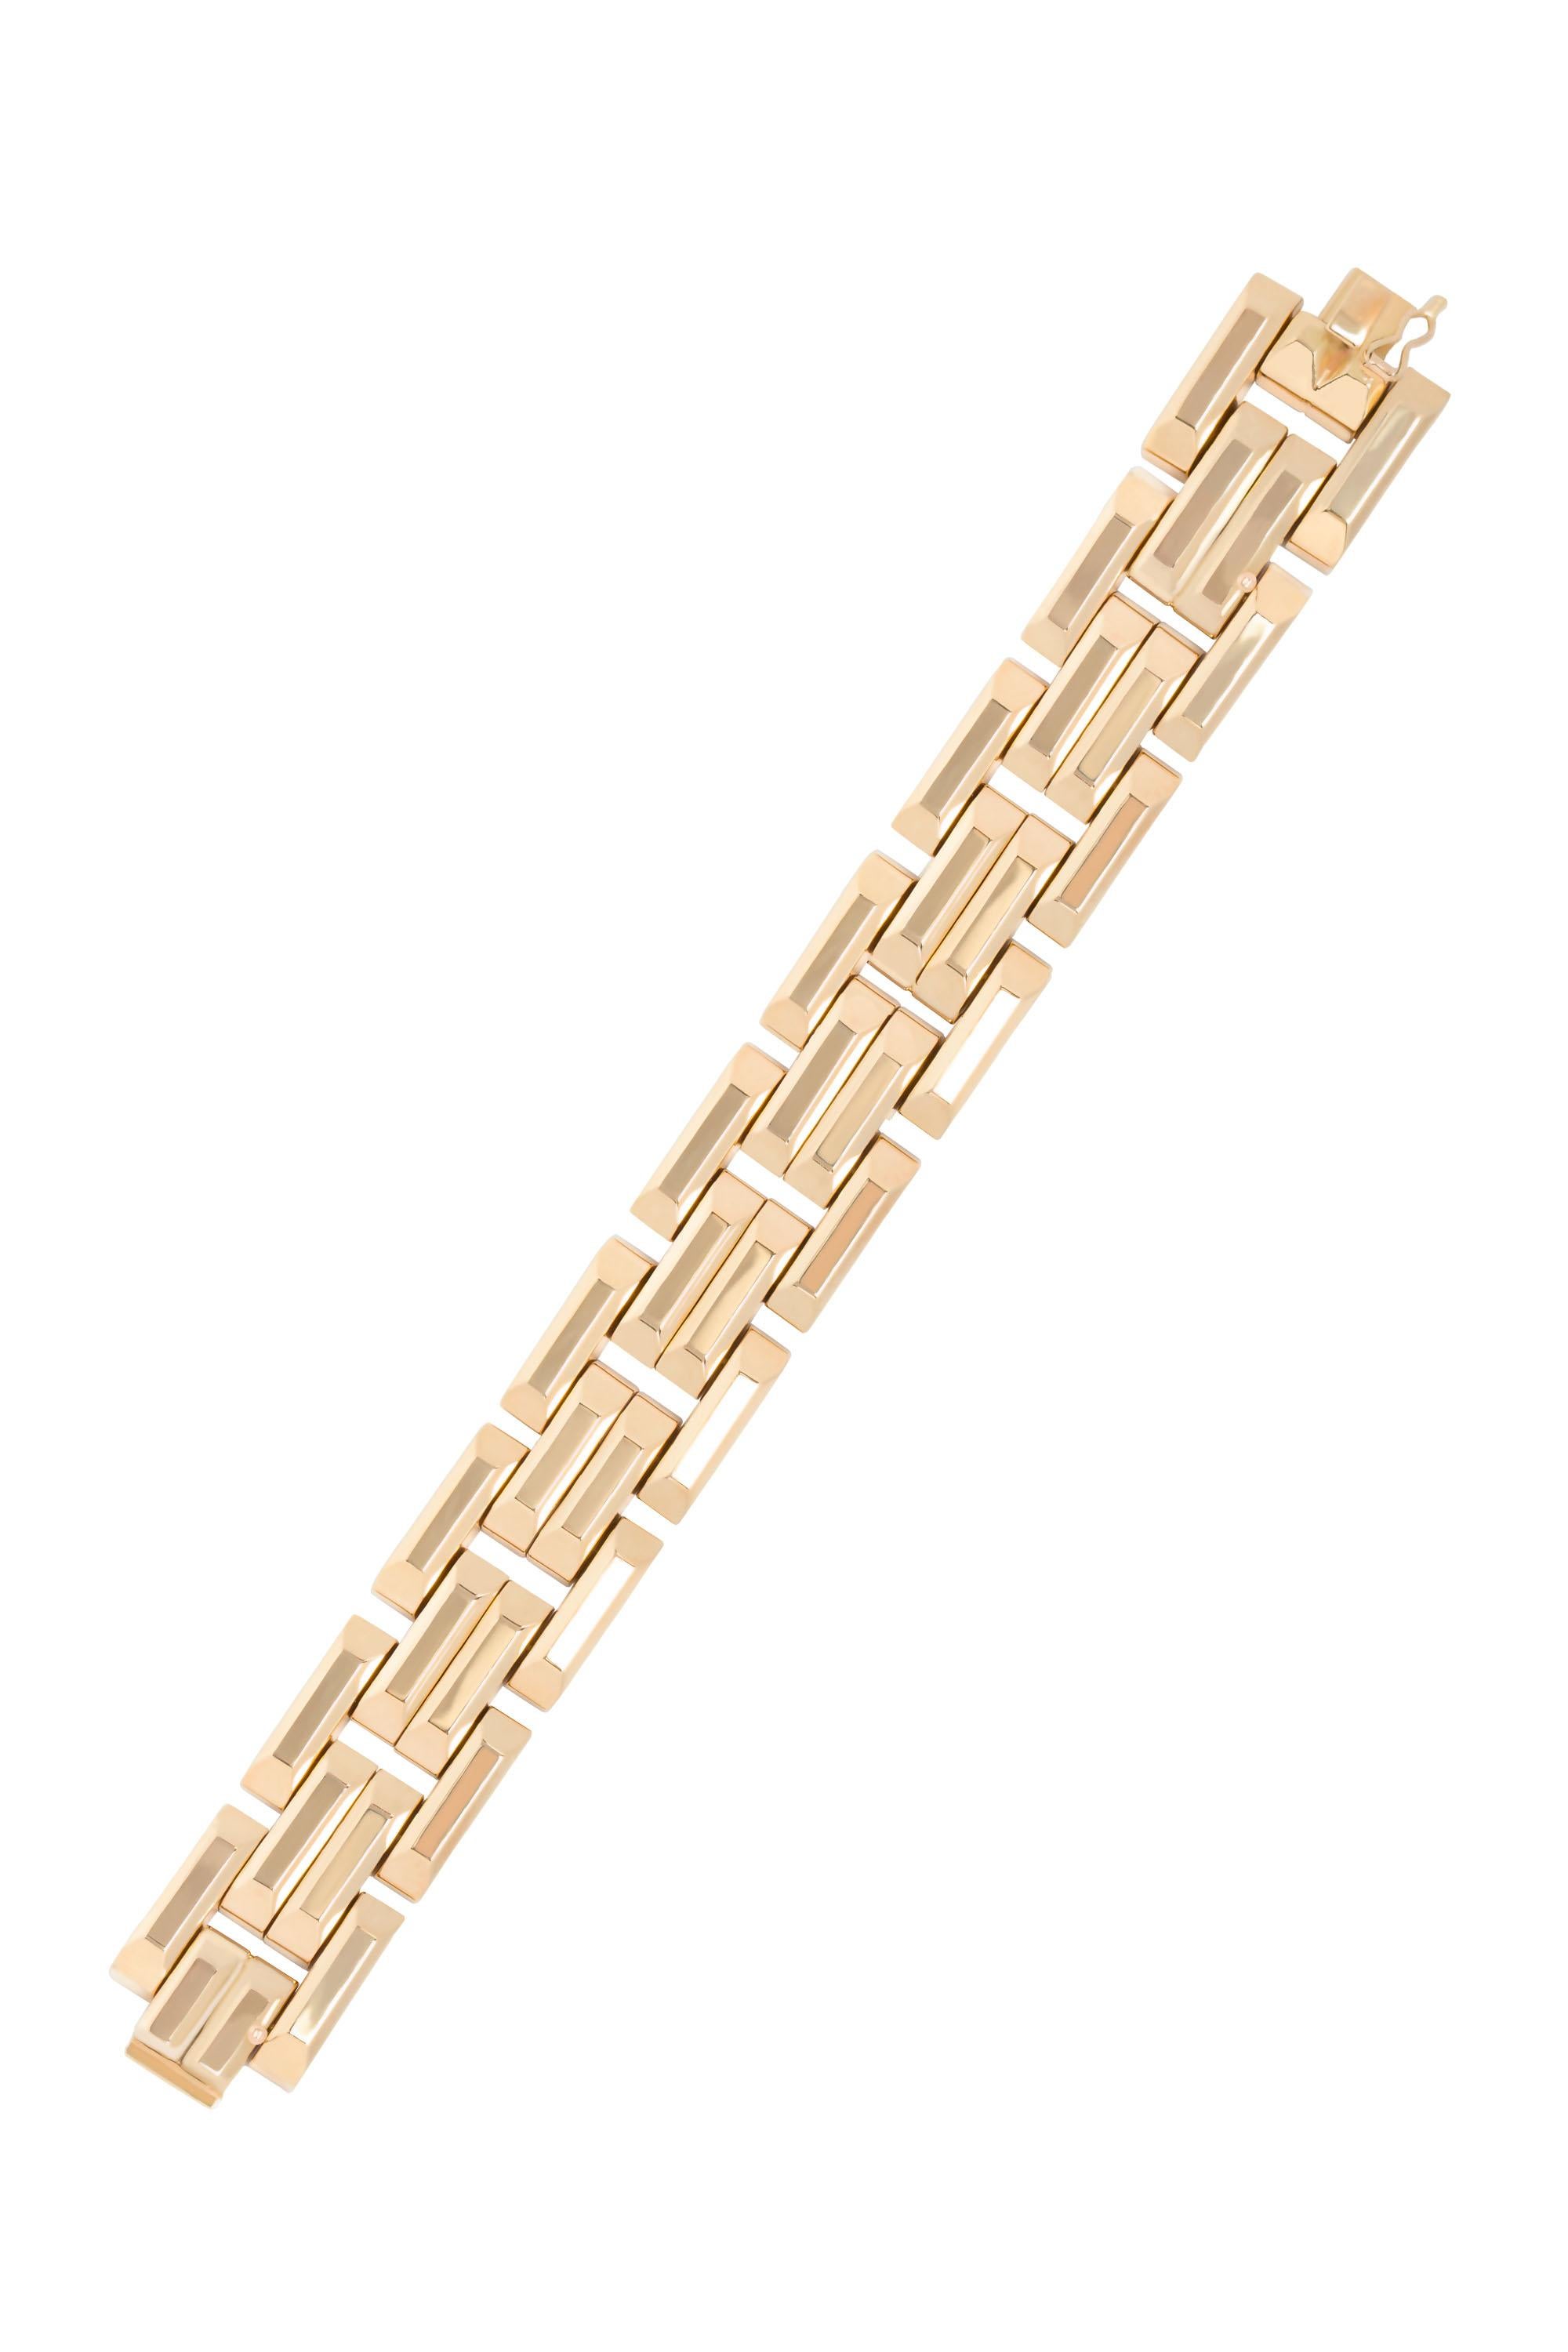 Rendered in stylized links of gleaming 18 karat yellow gold, this bracelet exemplifies the bold glamour of the 1940s. Measures 8” in length. 